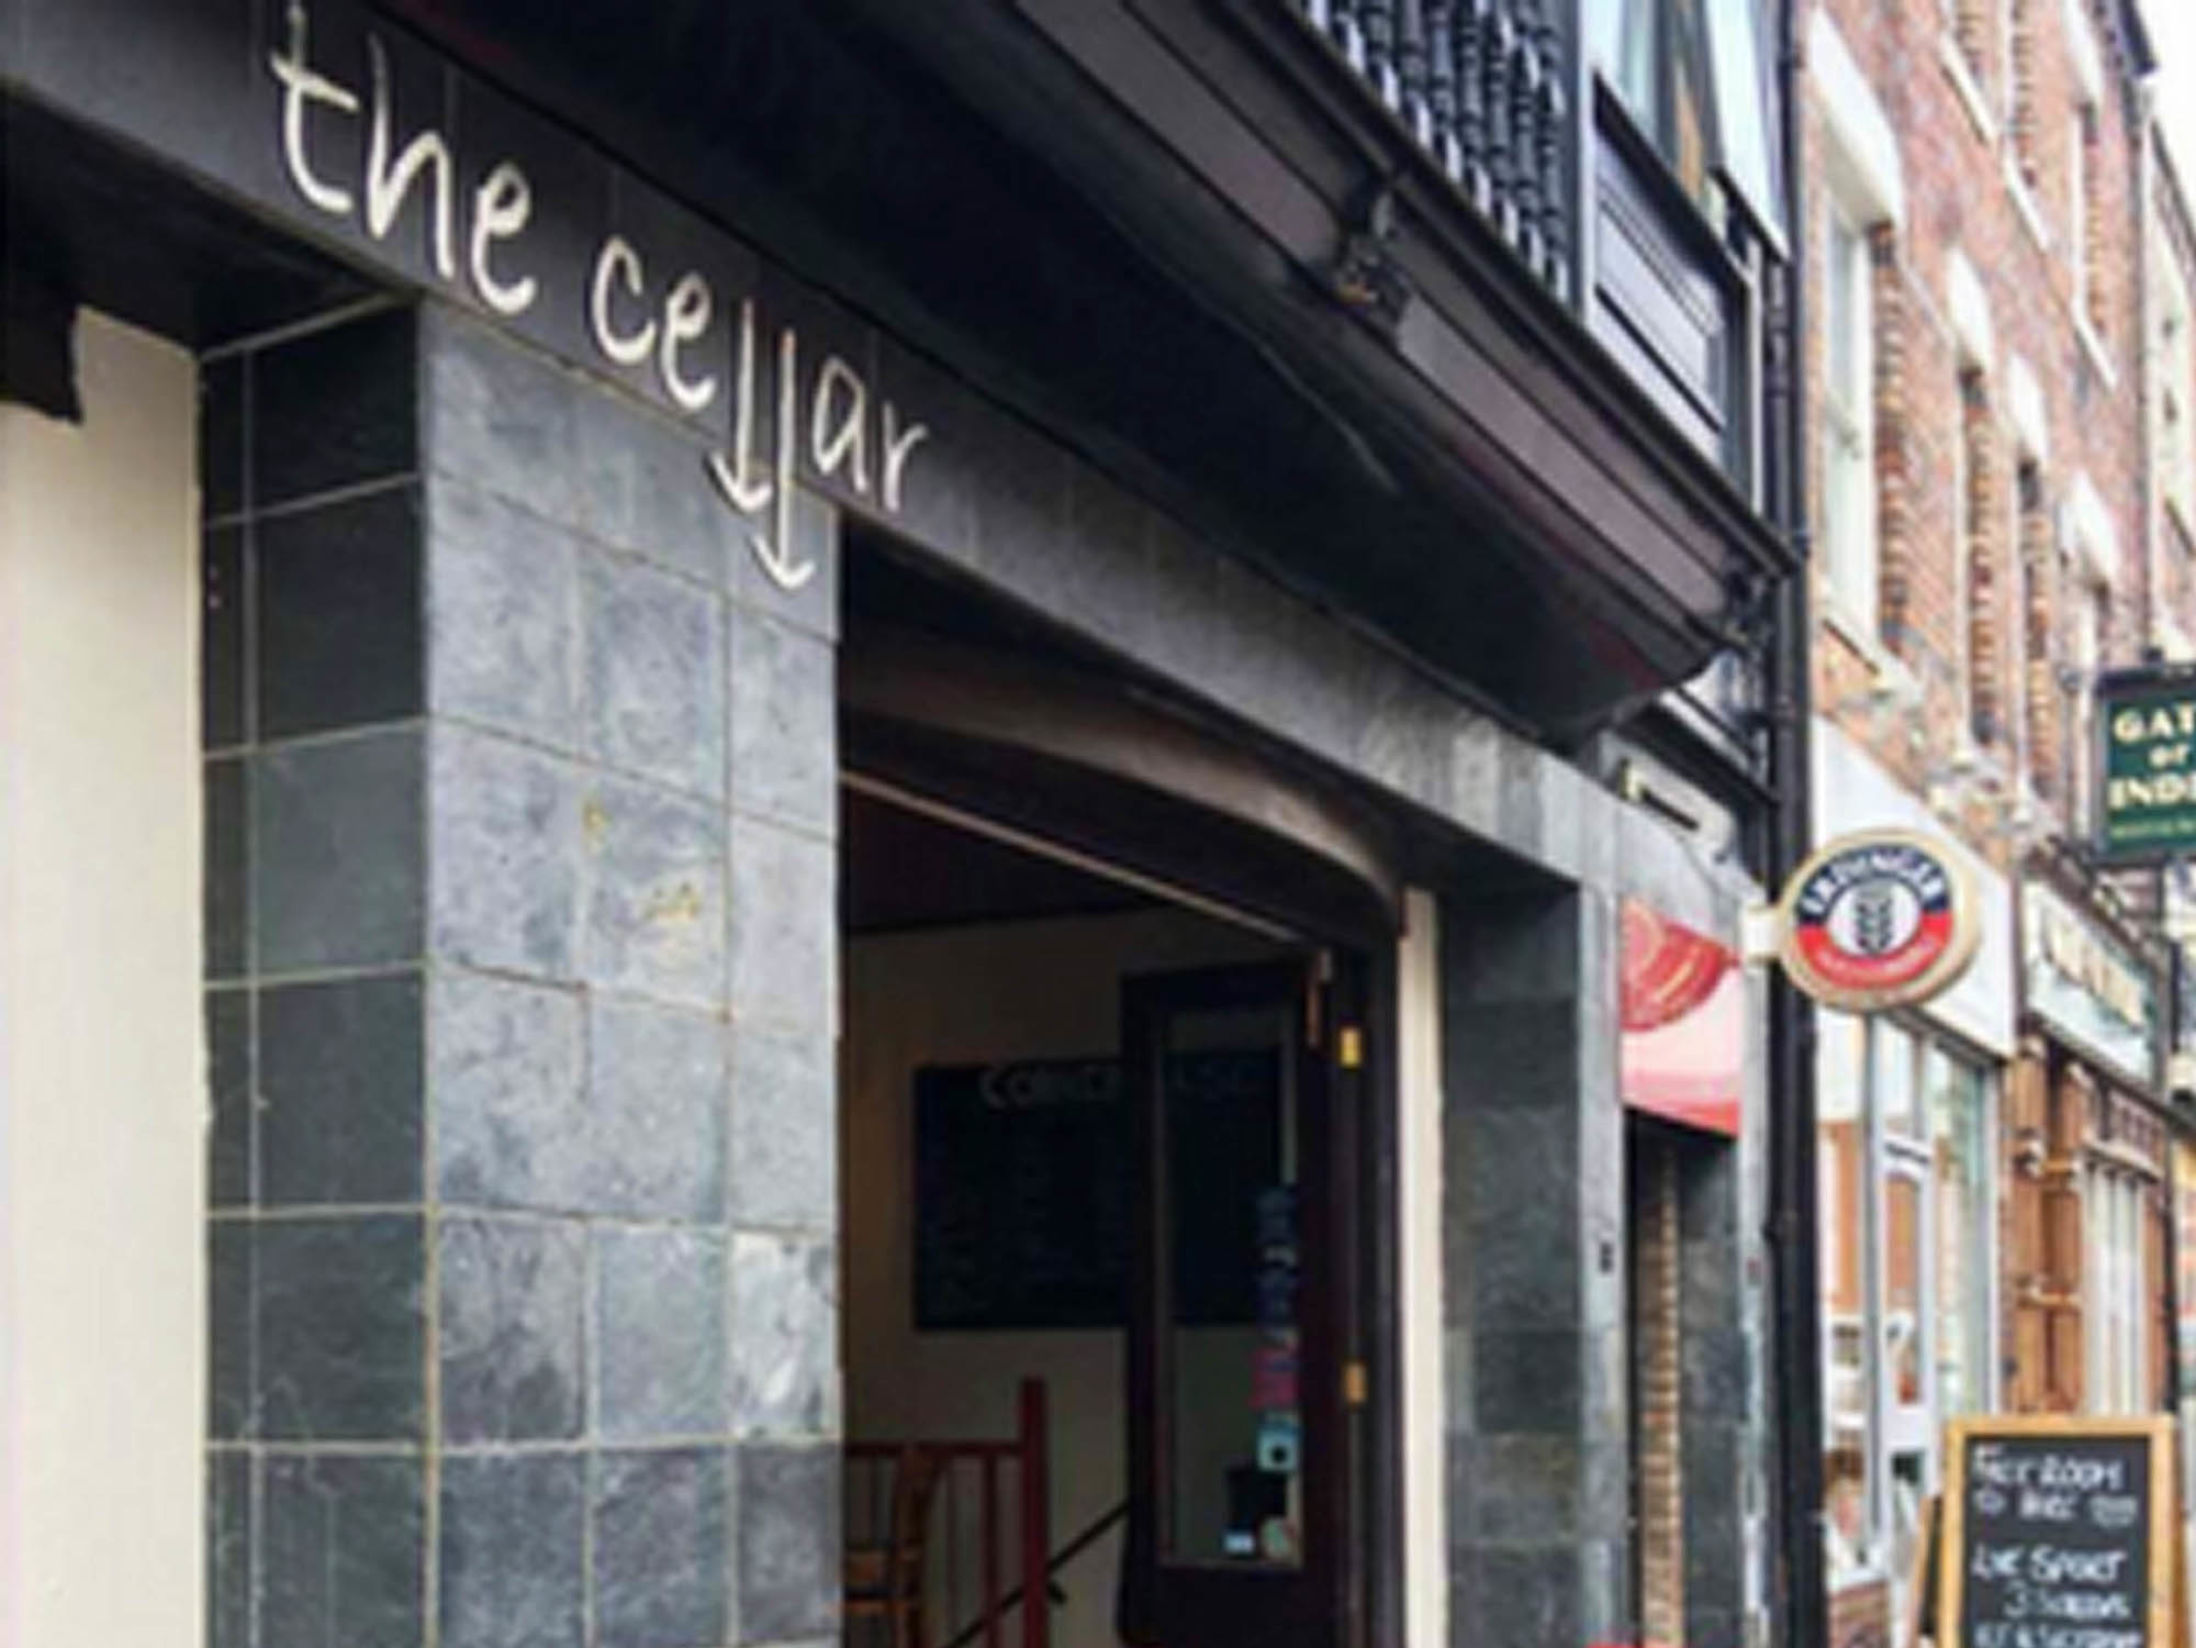 The Cellar - Best Bars in Chester